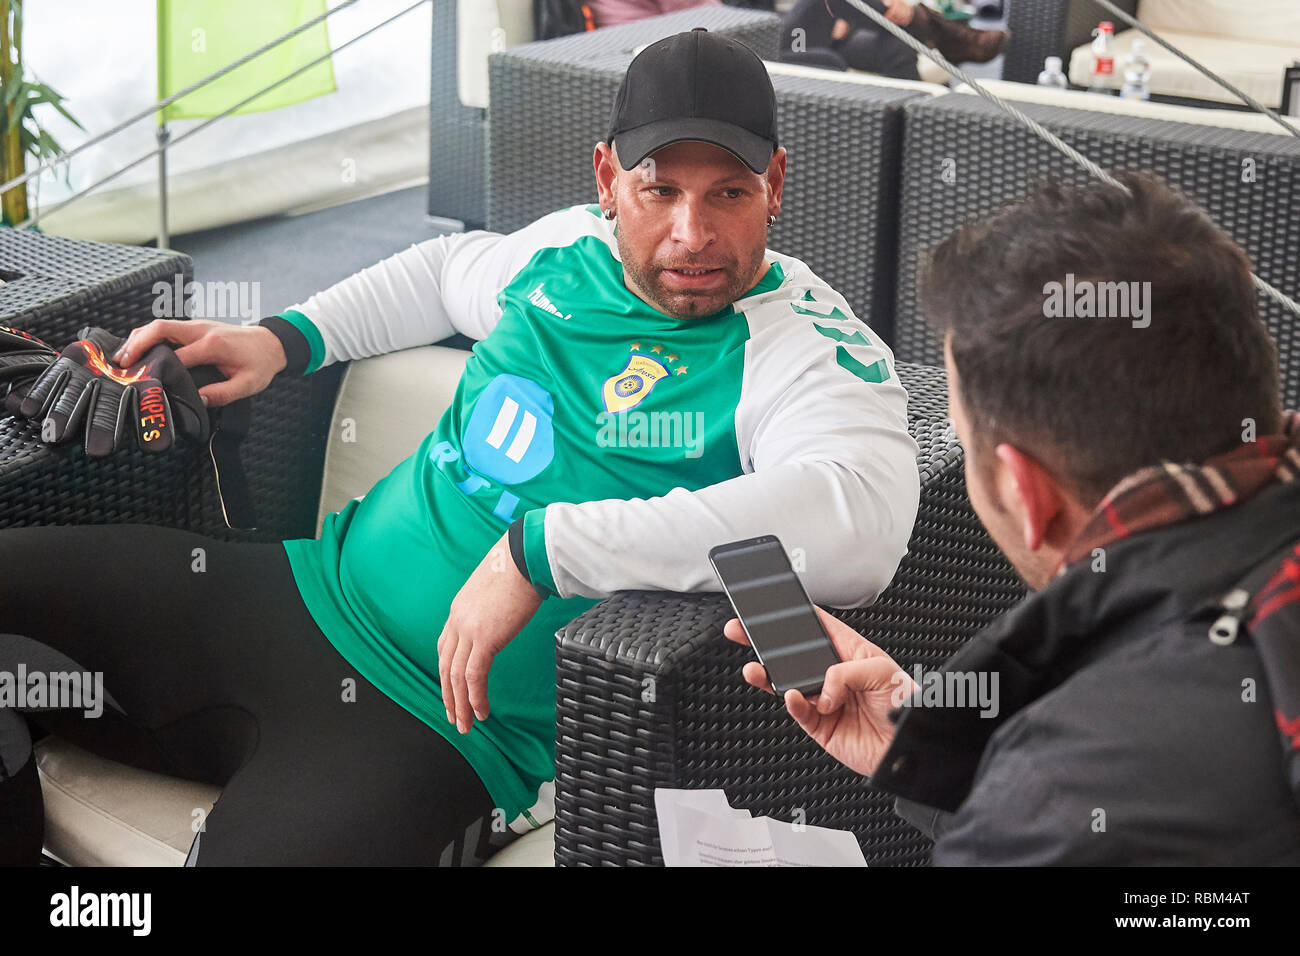 Arosa, Switzerland, 11th January 2019. Tim Wiese is interviewed at the 9th  unofficial Ice Snow Football World Cup 2019 in Arosa. Credit: Rolf  Simeon/Alamy Live News Stock Photo - Alamy